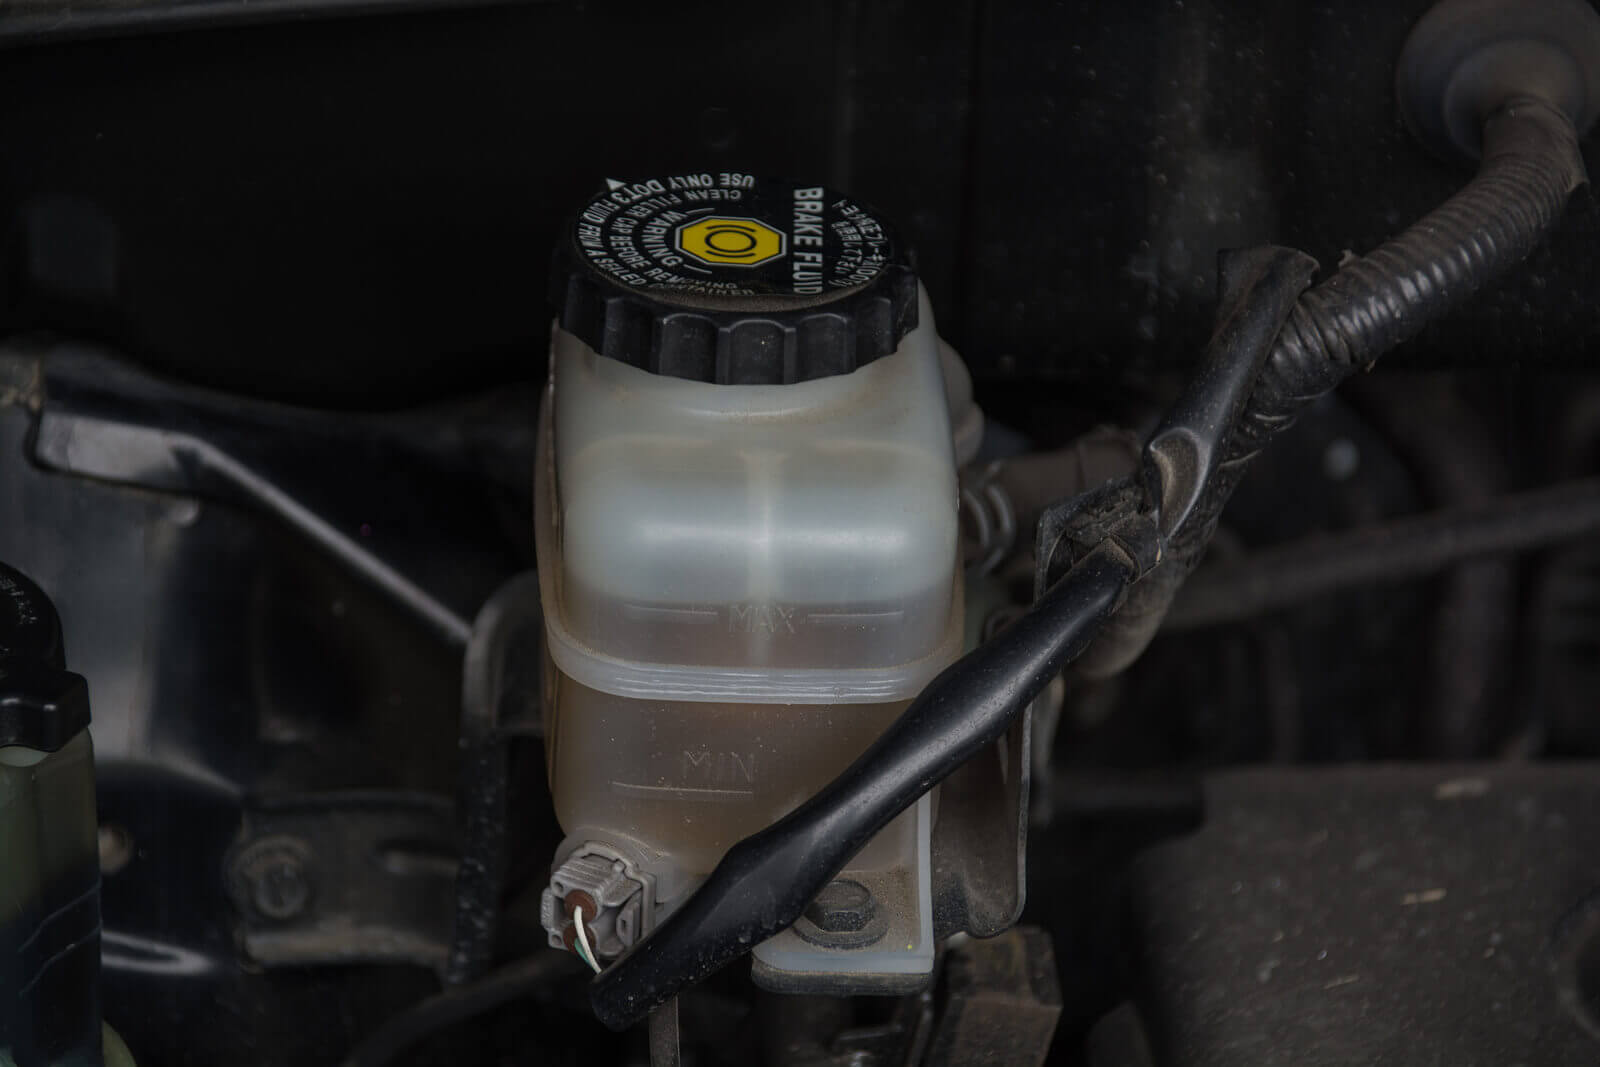 Why It's Important To Change Your Brake Fluid